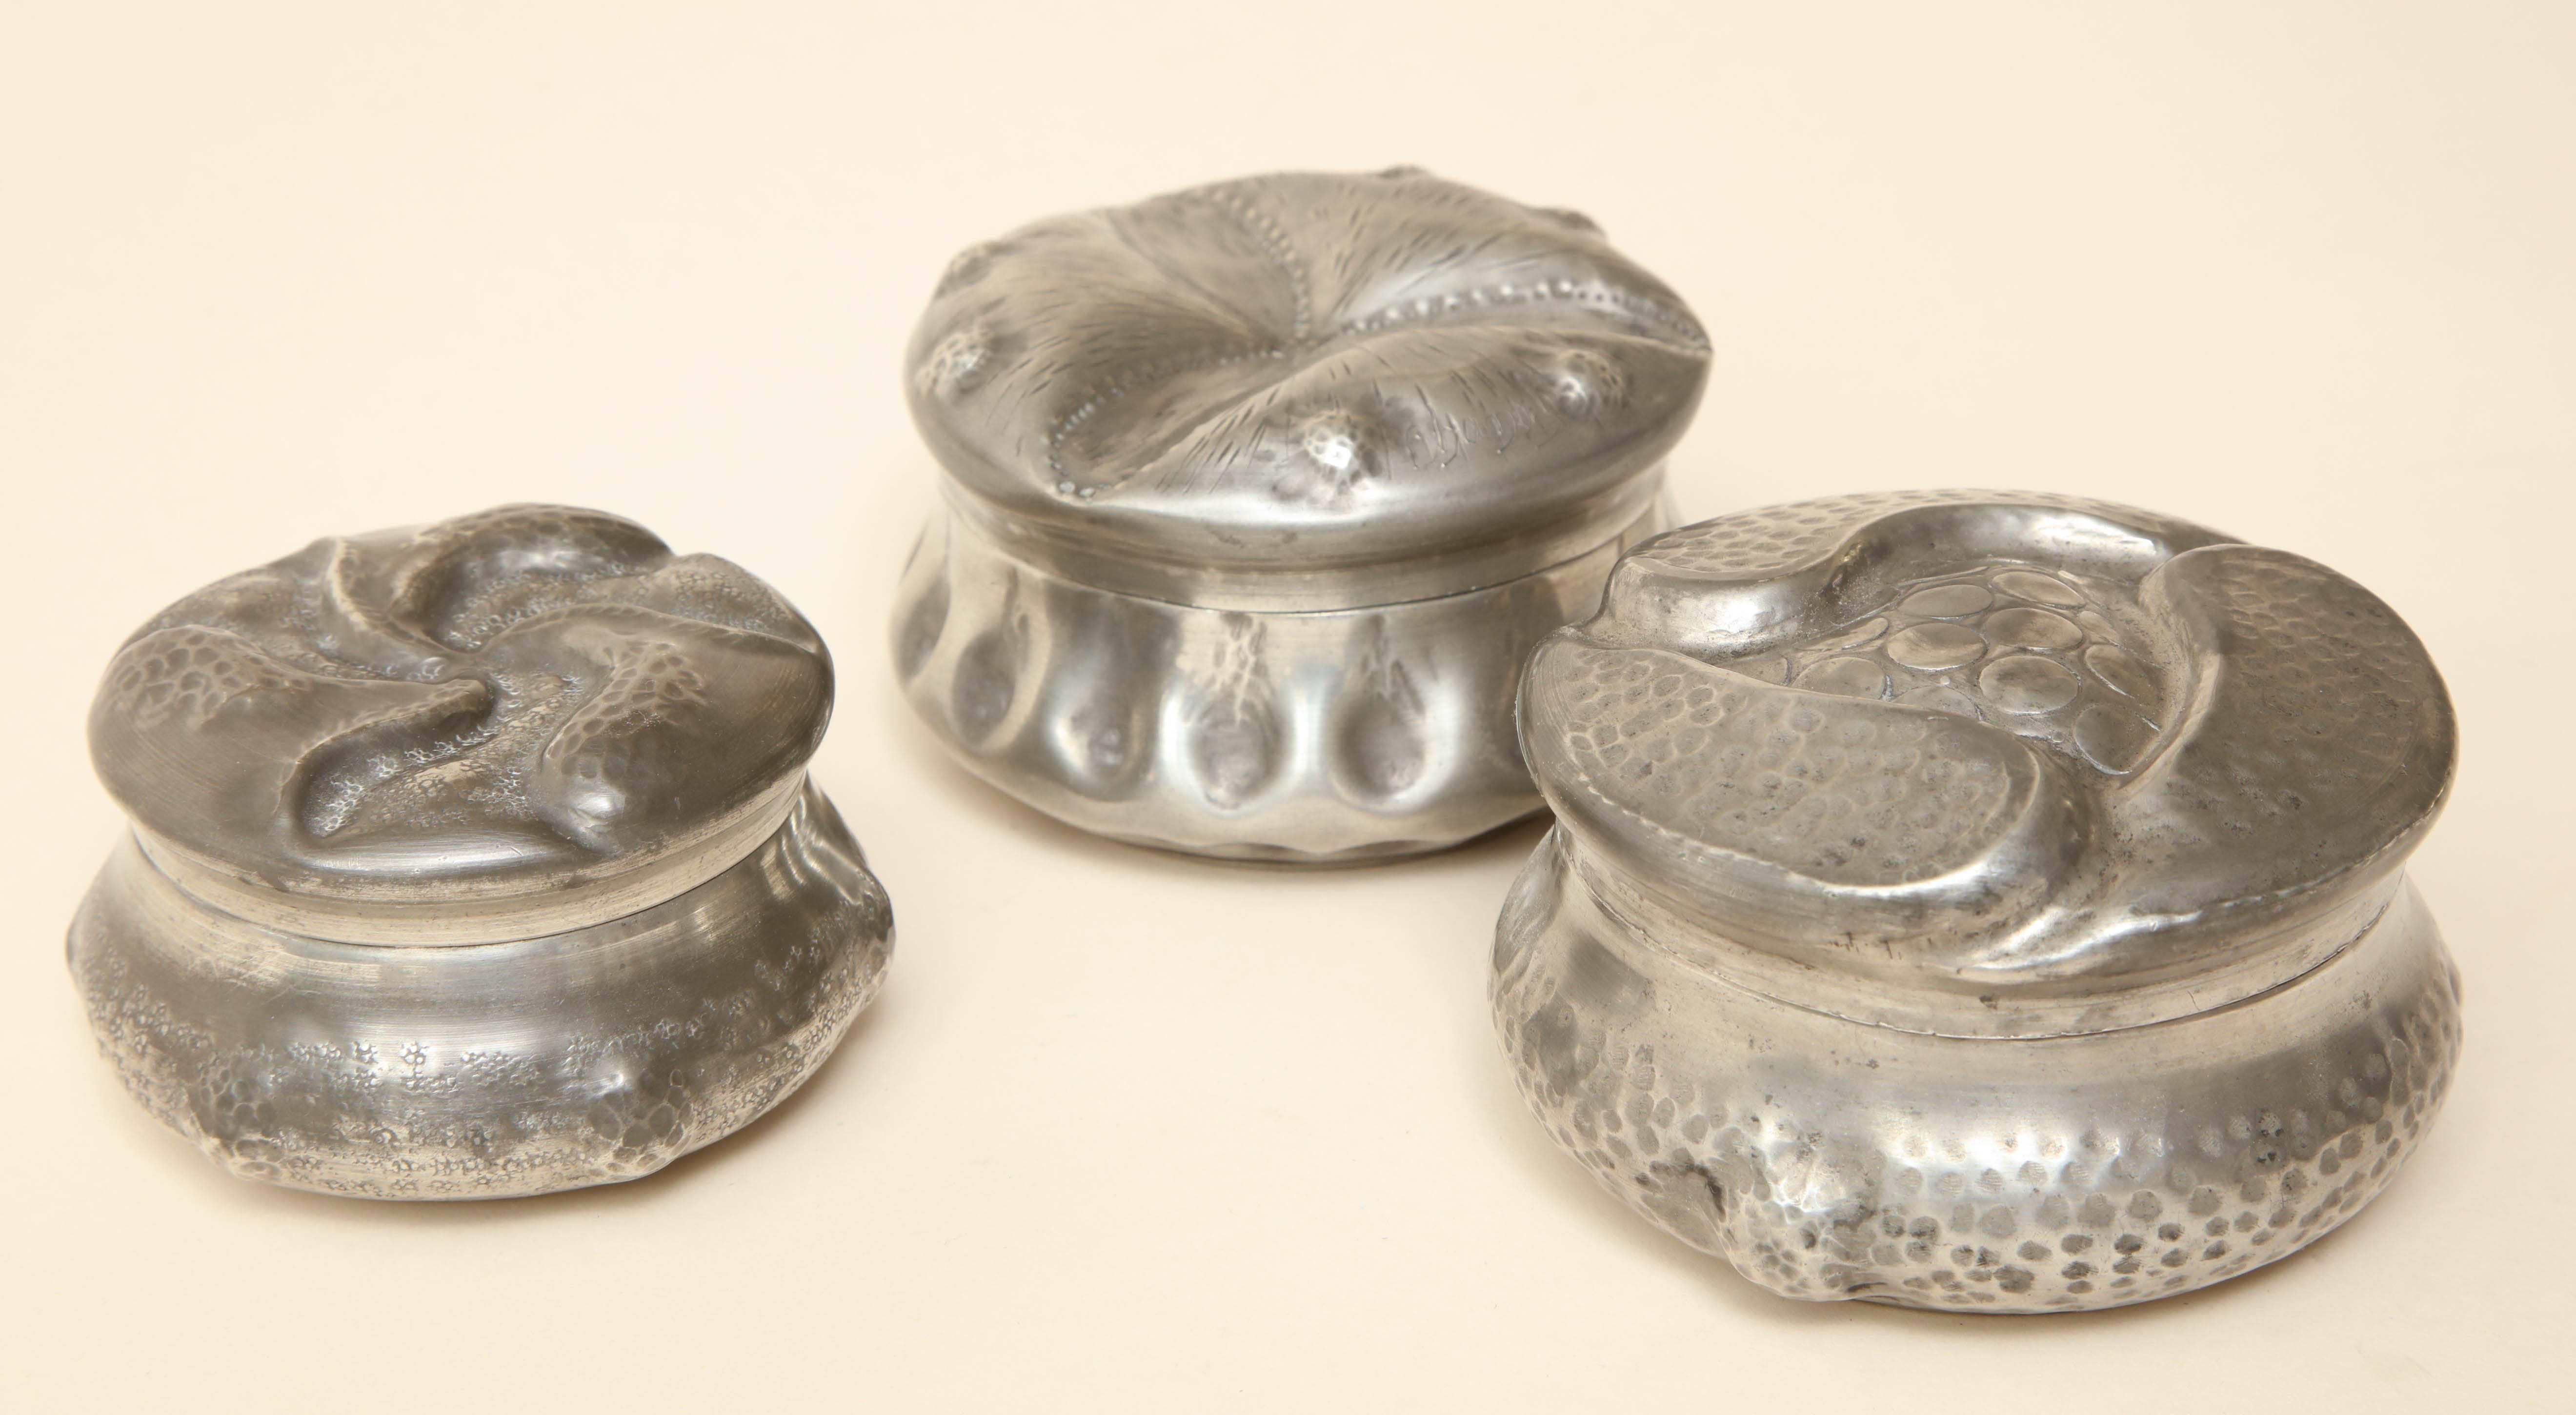 Measures: 3 1/2'' wide; 2 1/8'' high
hand-wrought dinanderie pewter martele covered box with three-lobe design with circles in the center.
Impressed A.E. CHANAL underneath.
$500-Inv. #599

Measures: 3 9/16'' wide; 2 1/16'' high
hand-wrought